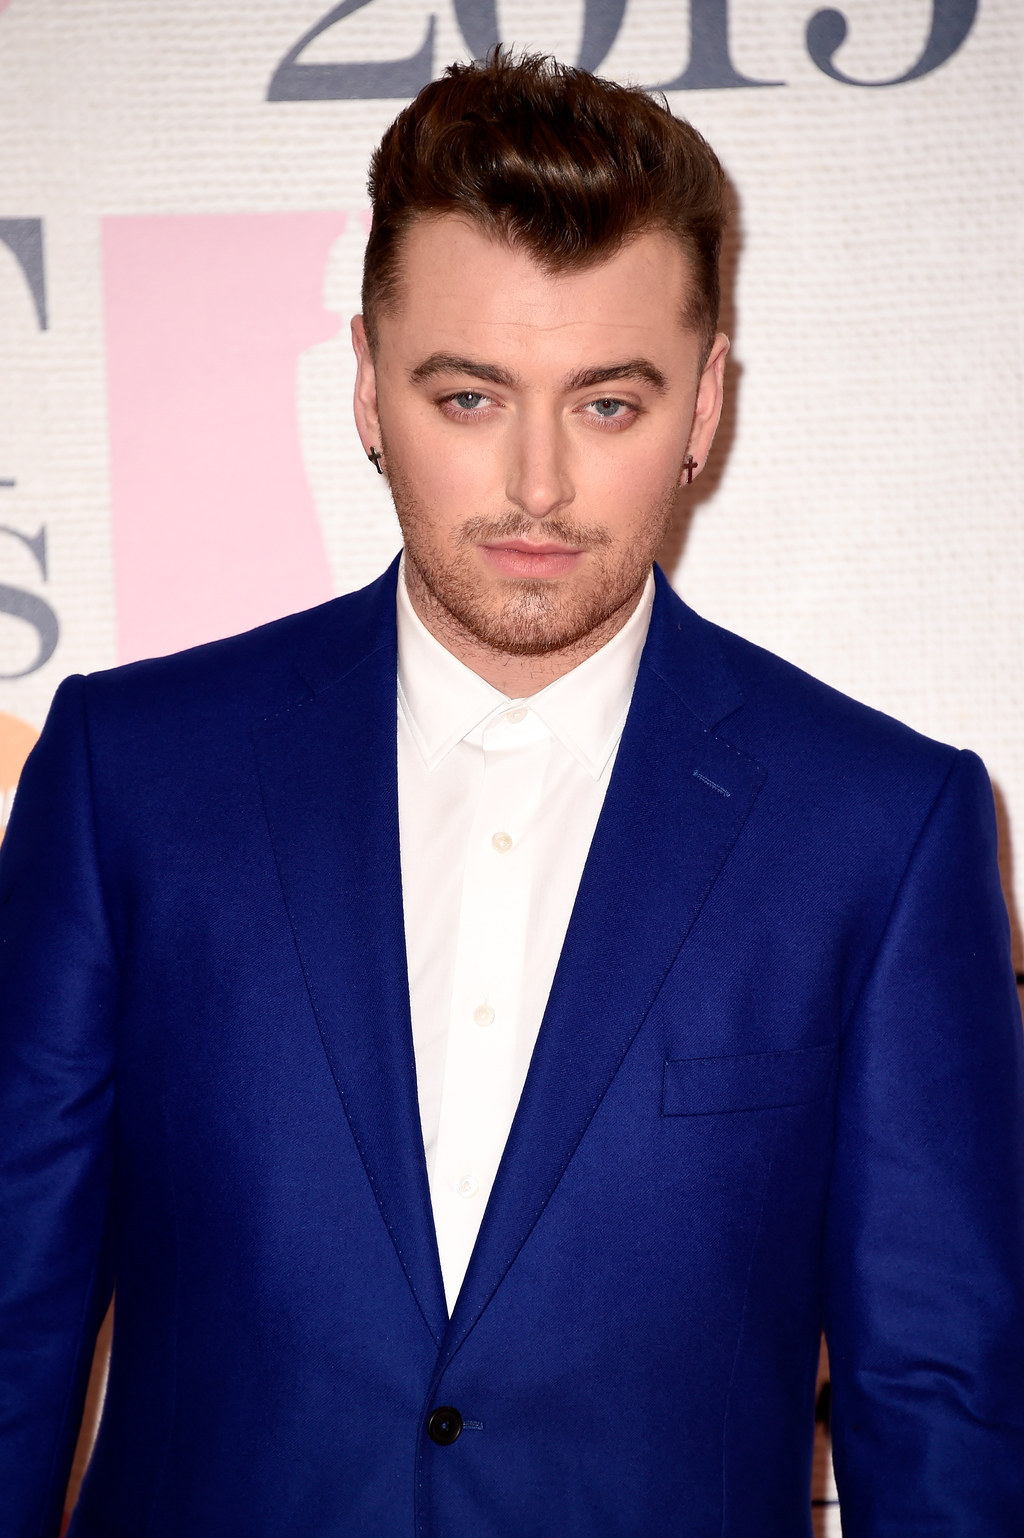 Sam Smith Has Spoken About The Abuse He's Suffered For Being Gay